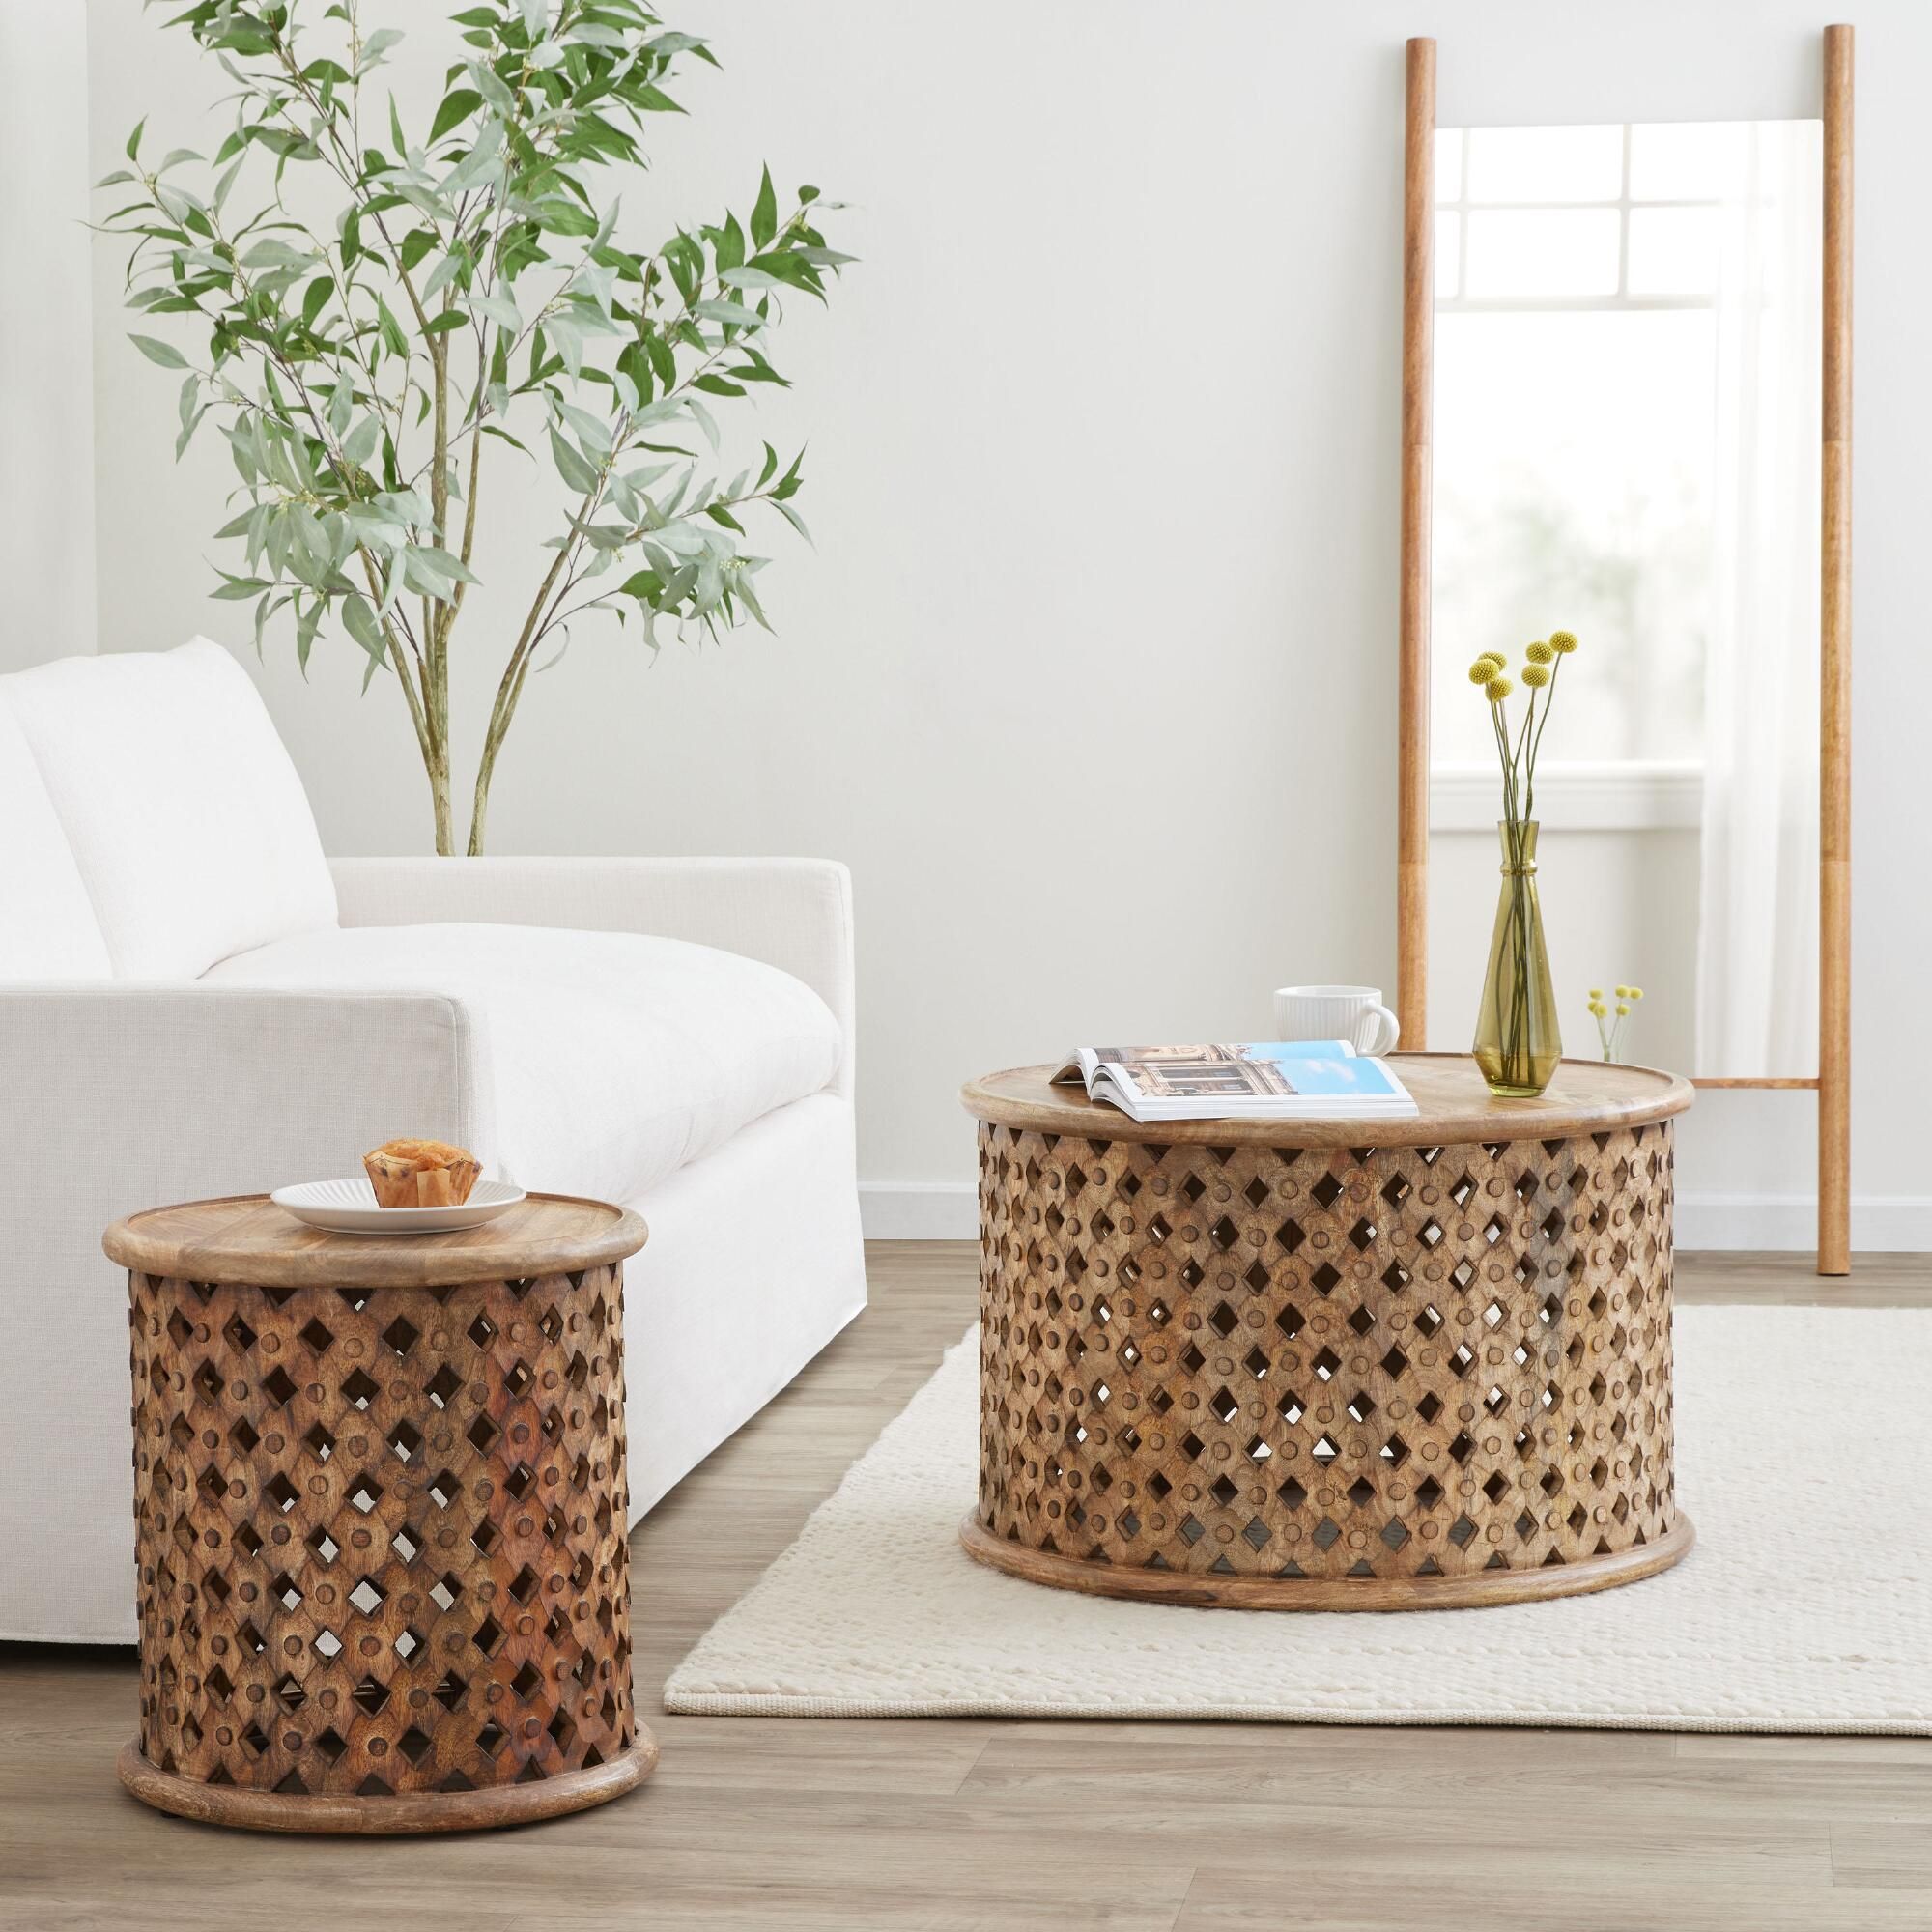 Lattice Carved Wood Furniture Collection by World Market | World Market